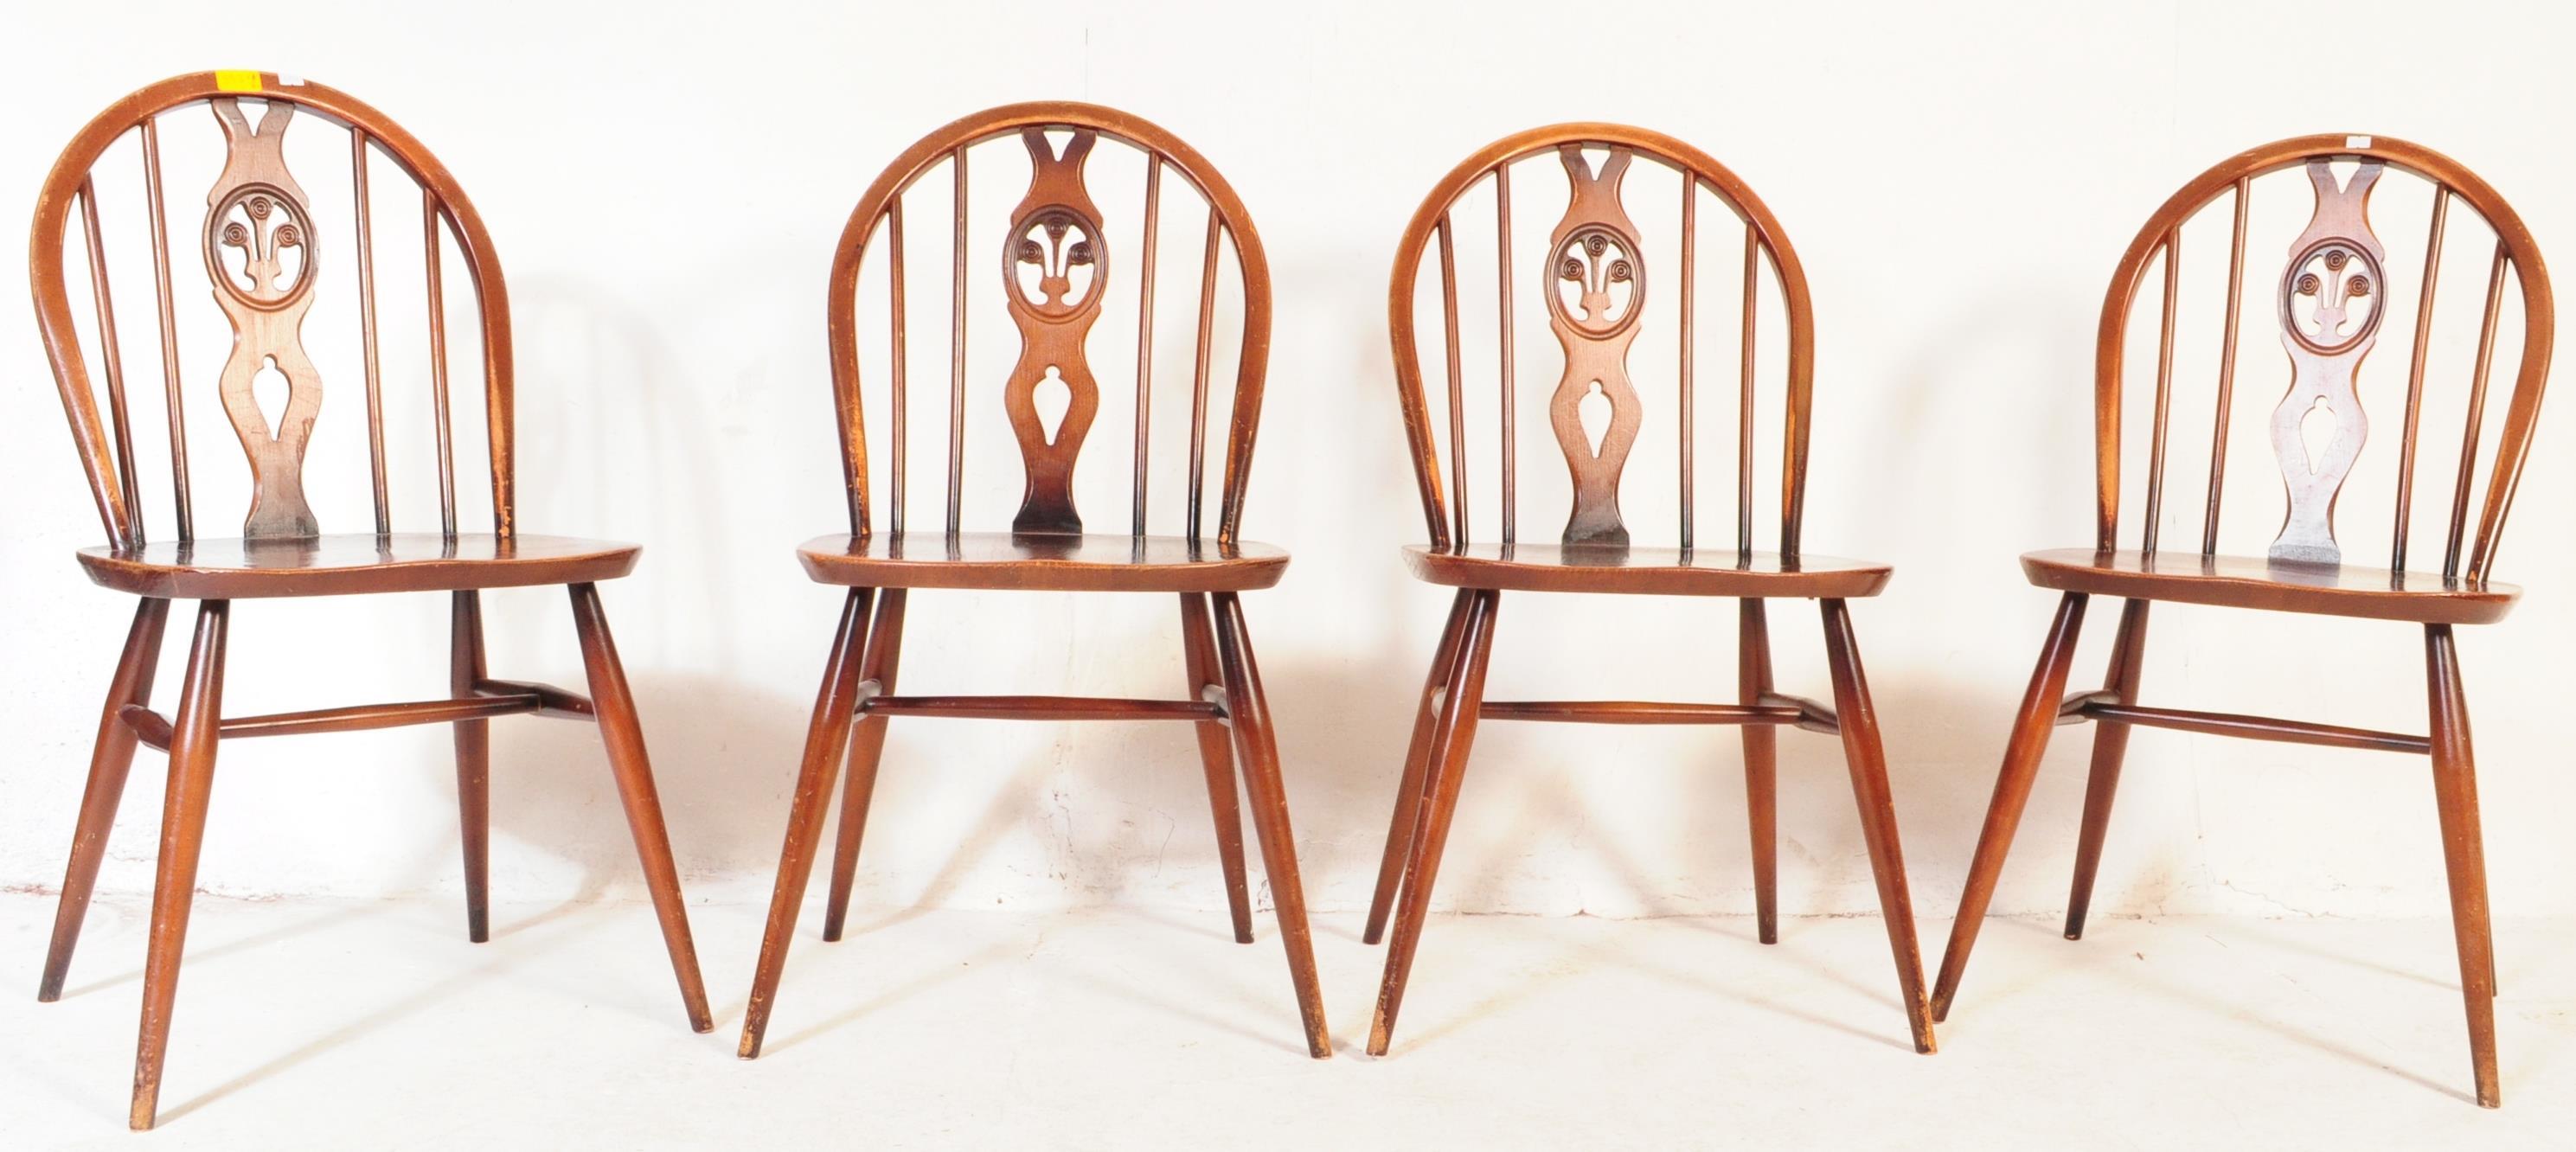 LATE 20TH CENTURY ERCOL DROP LEAF DINING TABLE & CHAIRS - Image 6 of 6